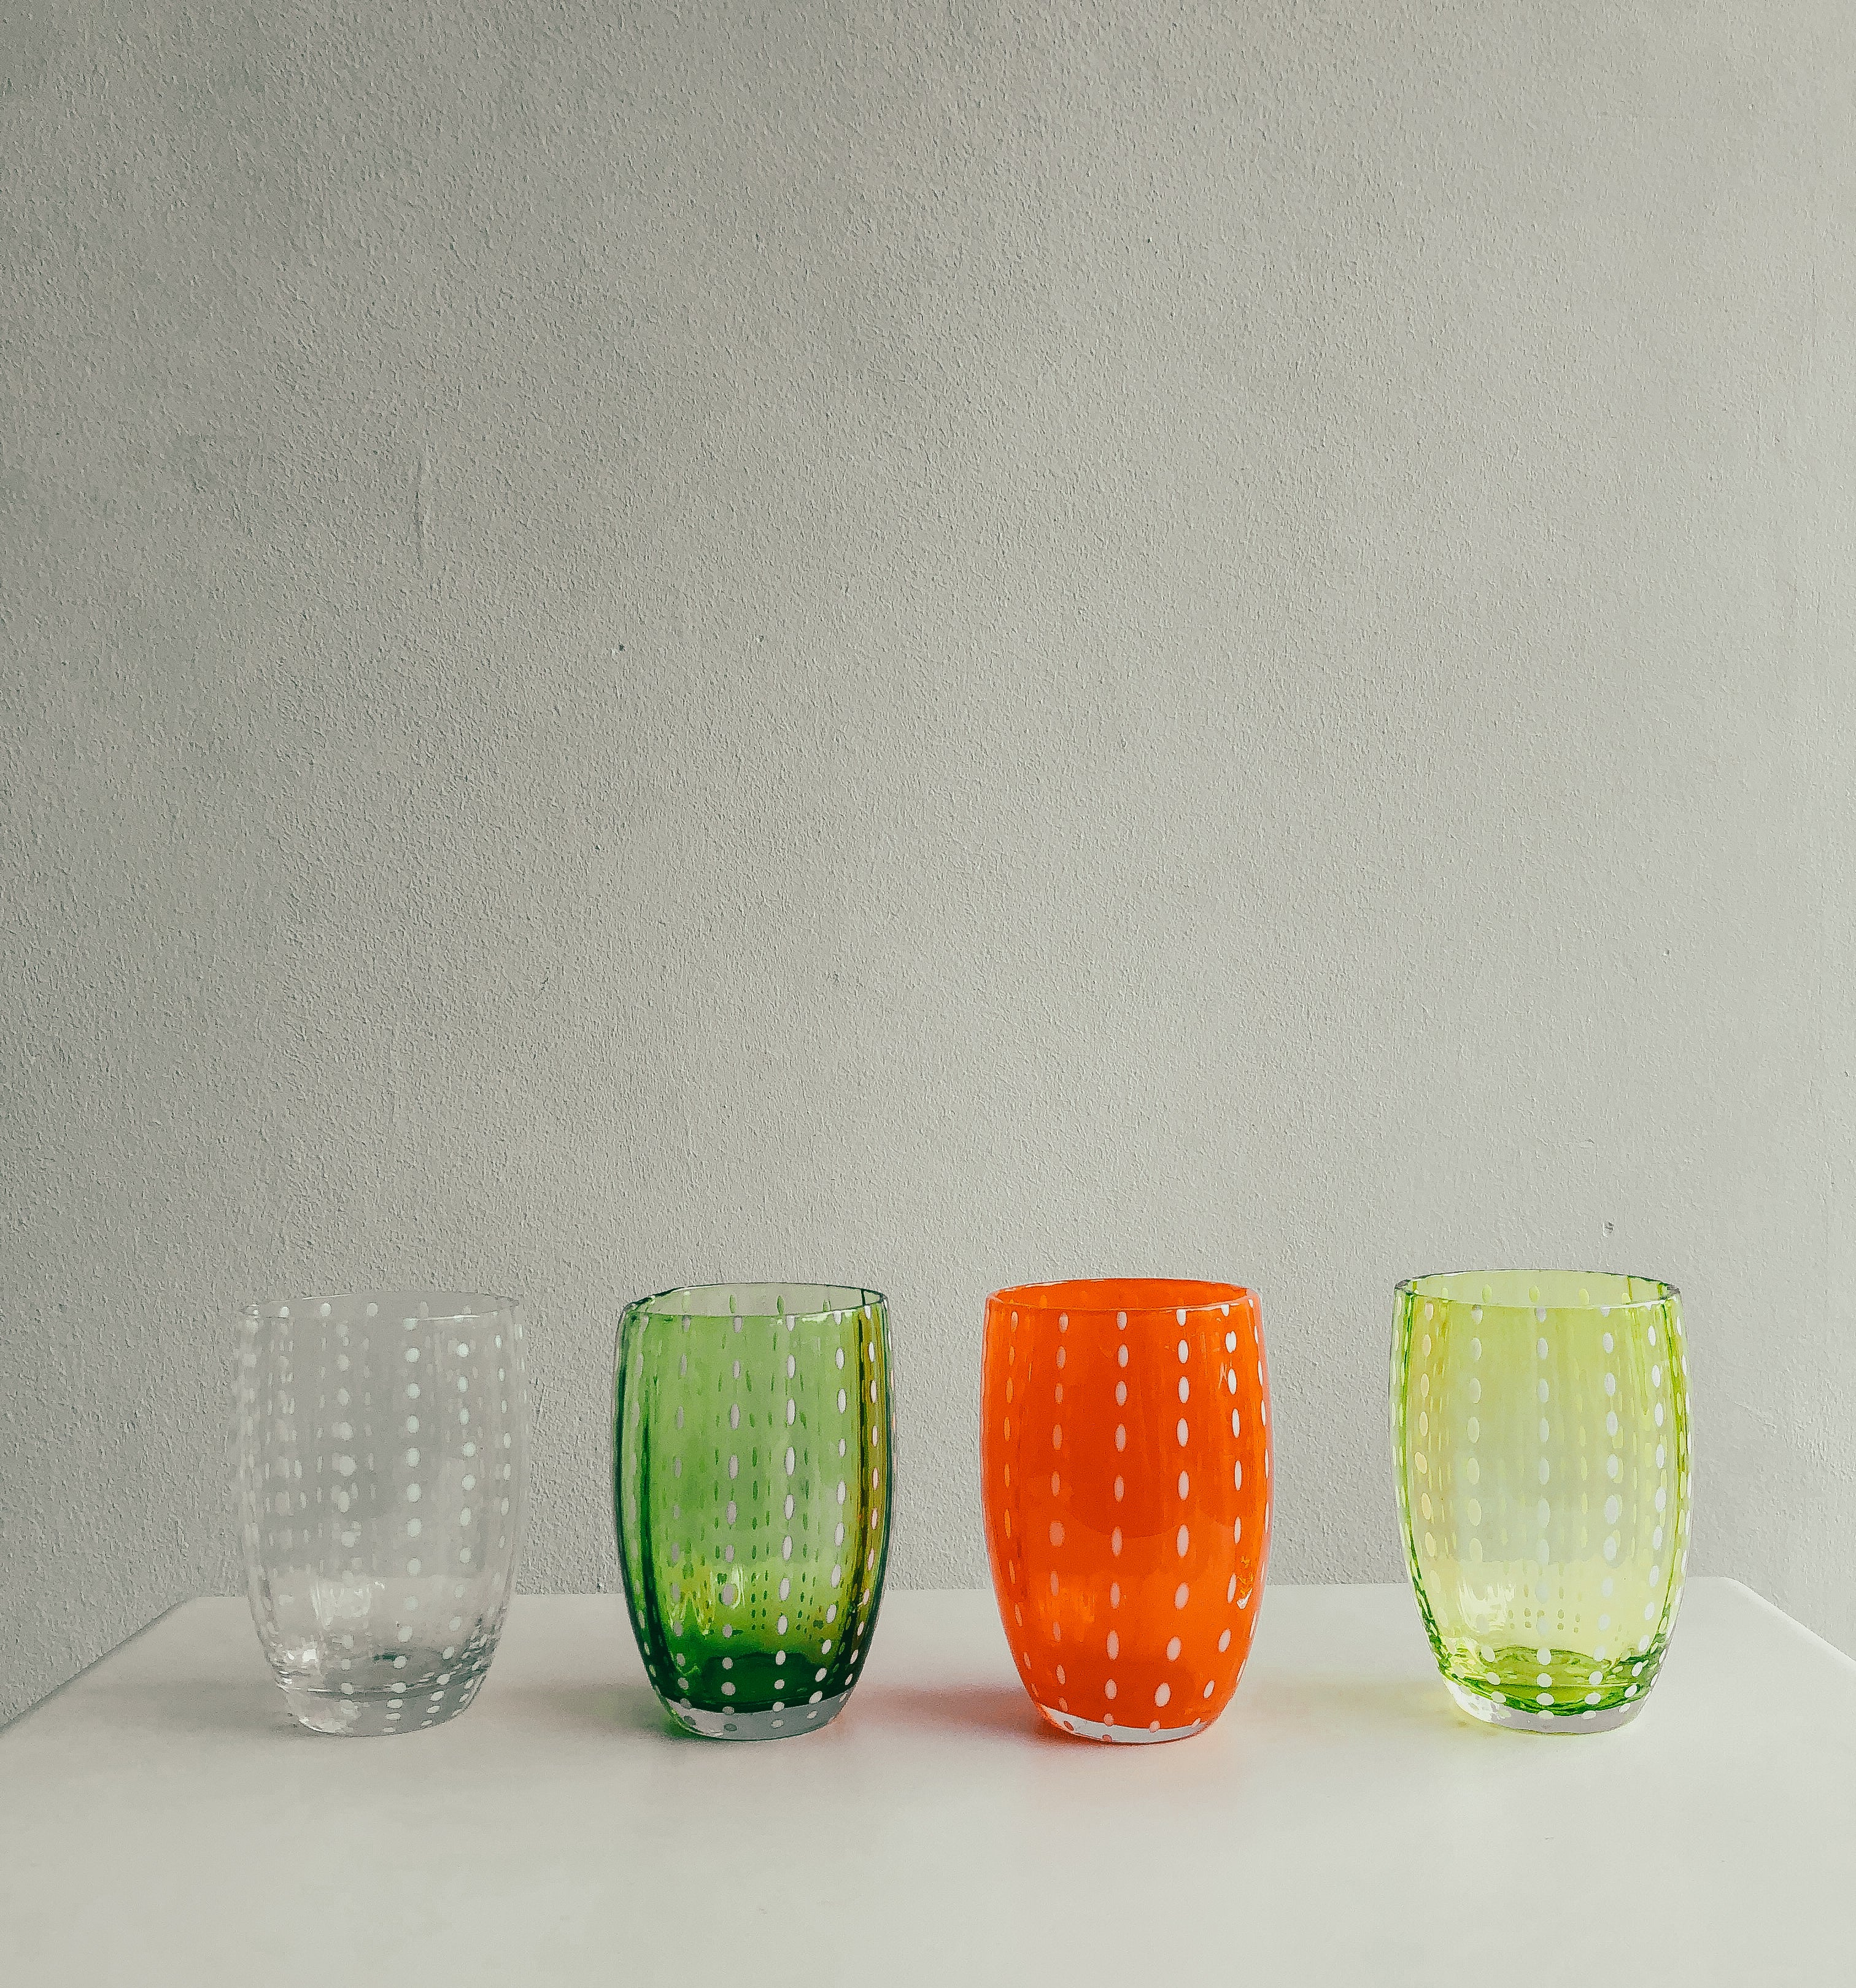 Handmade Watermelon Glasses in Chilli by PROSE Tabletop